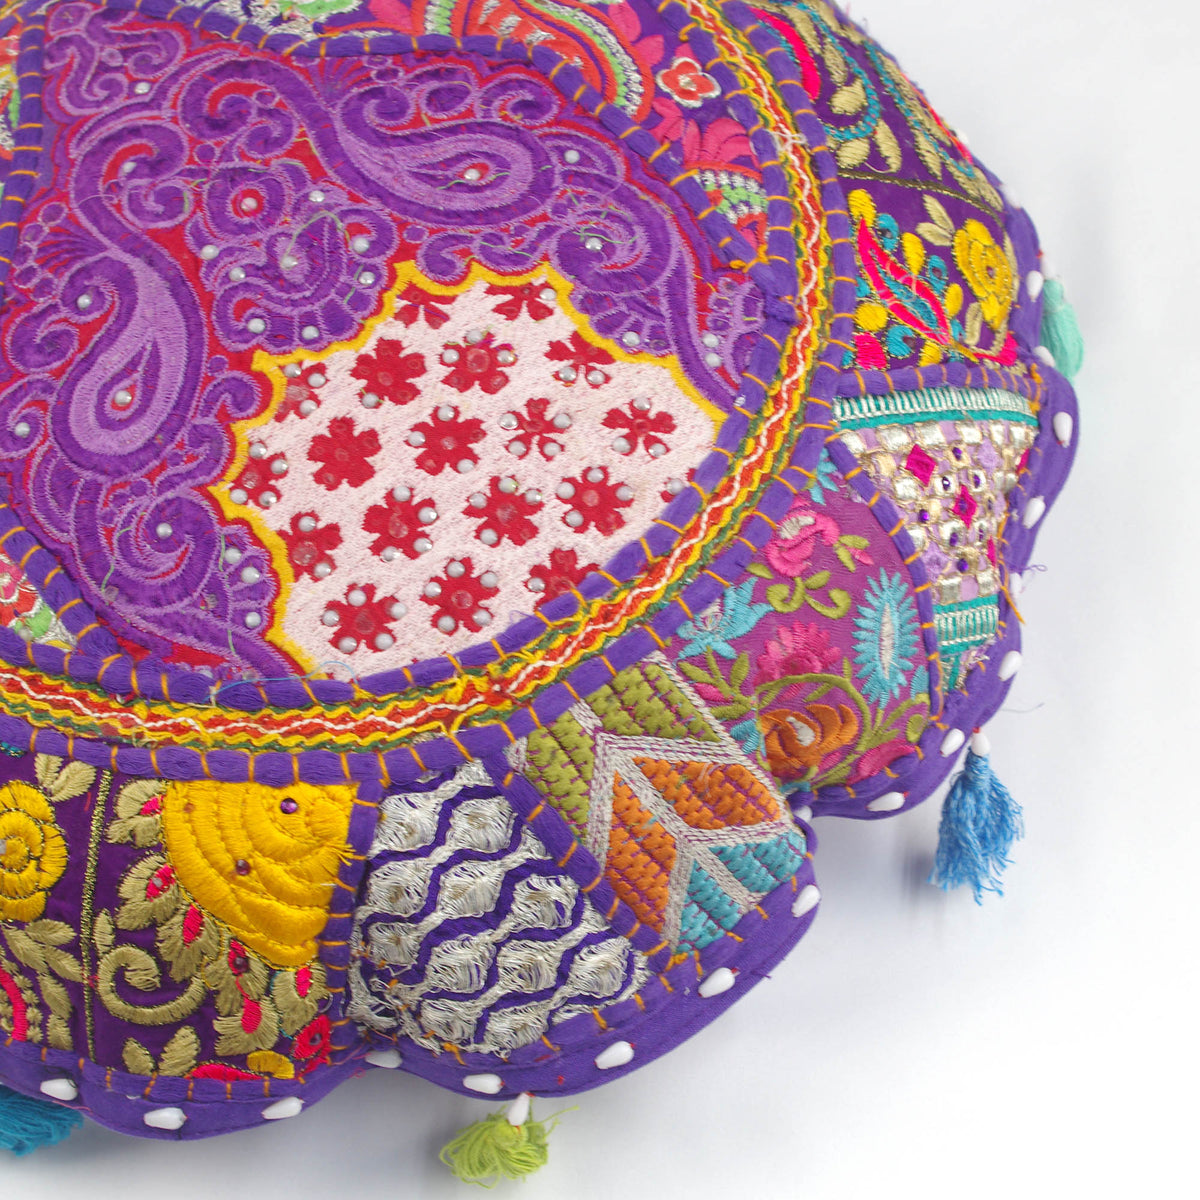 Purple Round Floor Embroidered Patchwork Pouf Ottoman Indian Vintage Cushion Cover 18"